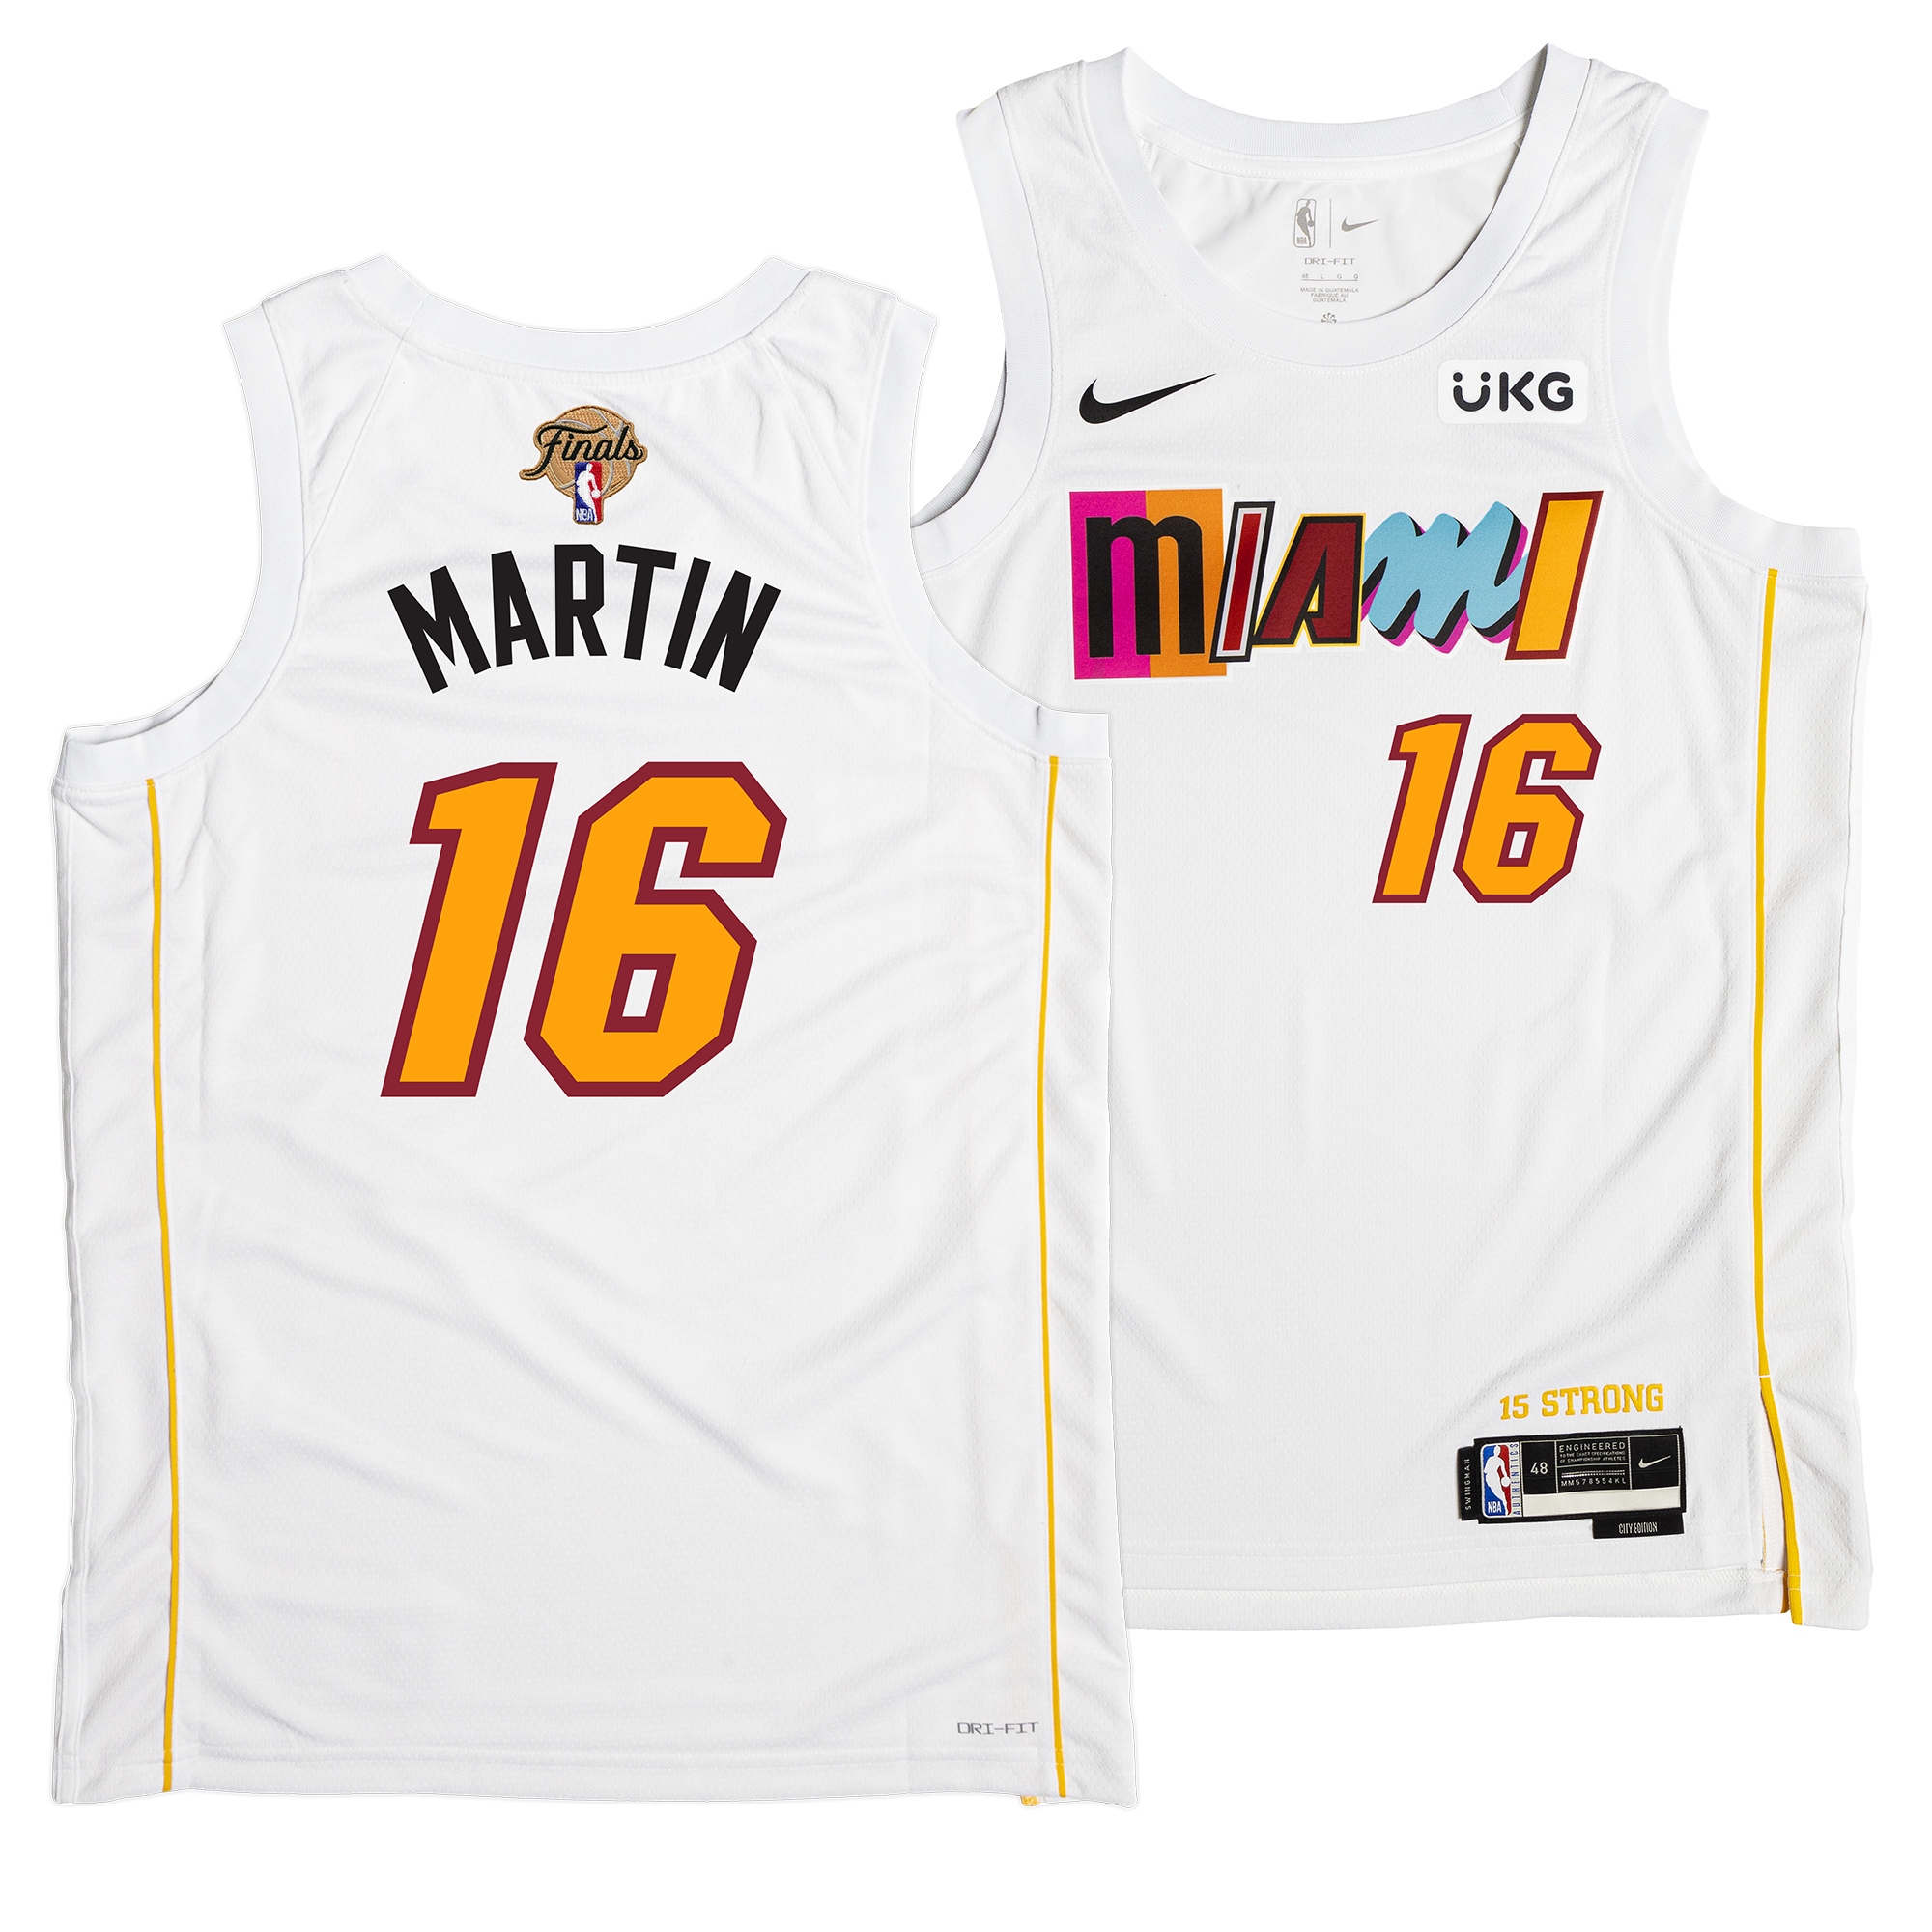 Newest Miami Heat Vice Jersey again the best in Association